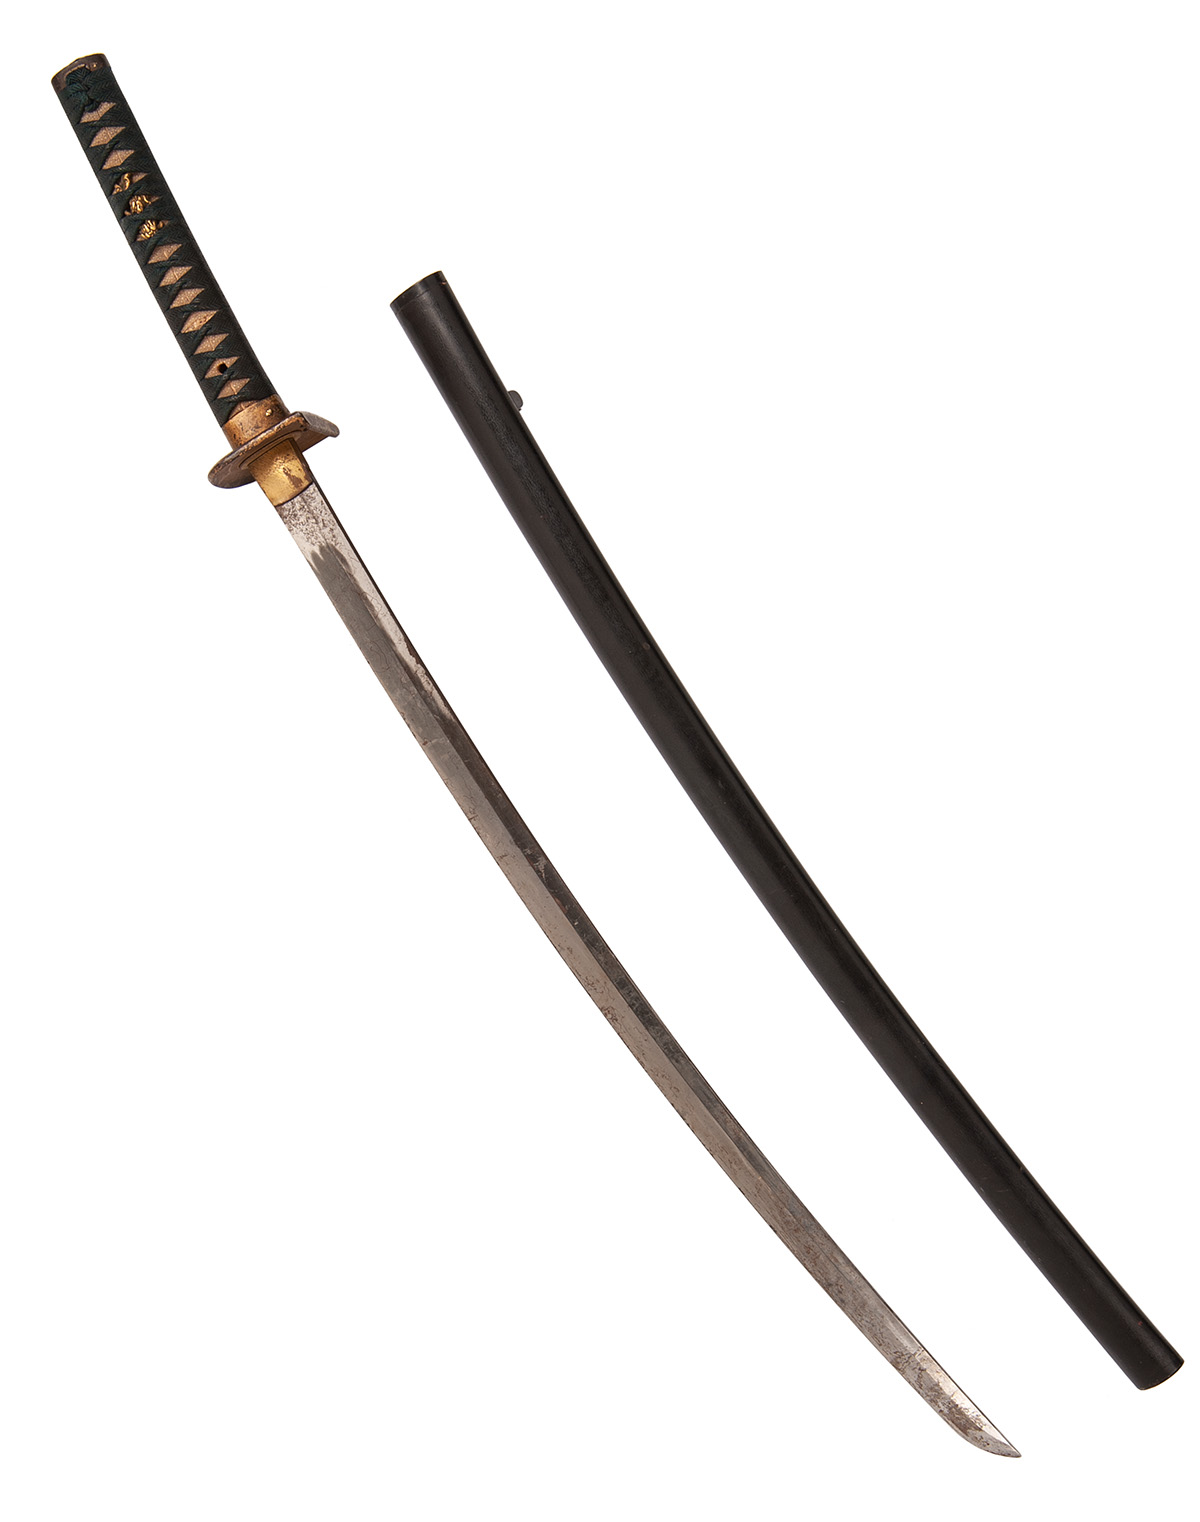 A JAPANESE KATANA WITH UNUSUAL MOUNTS, believed early to mid 19th century with an earlier (